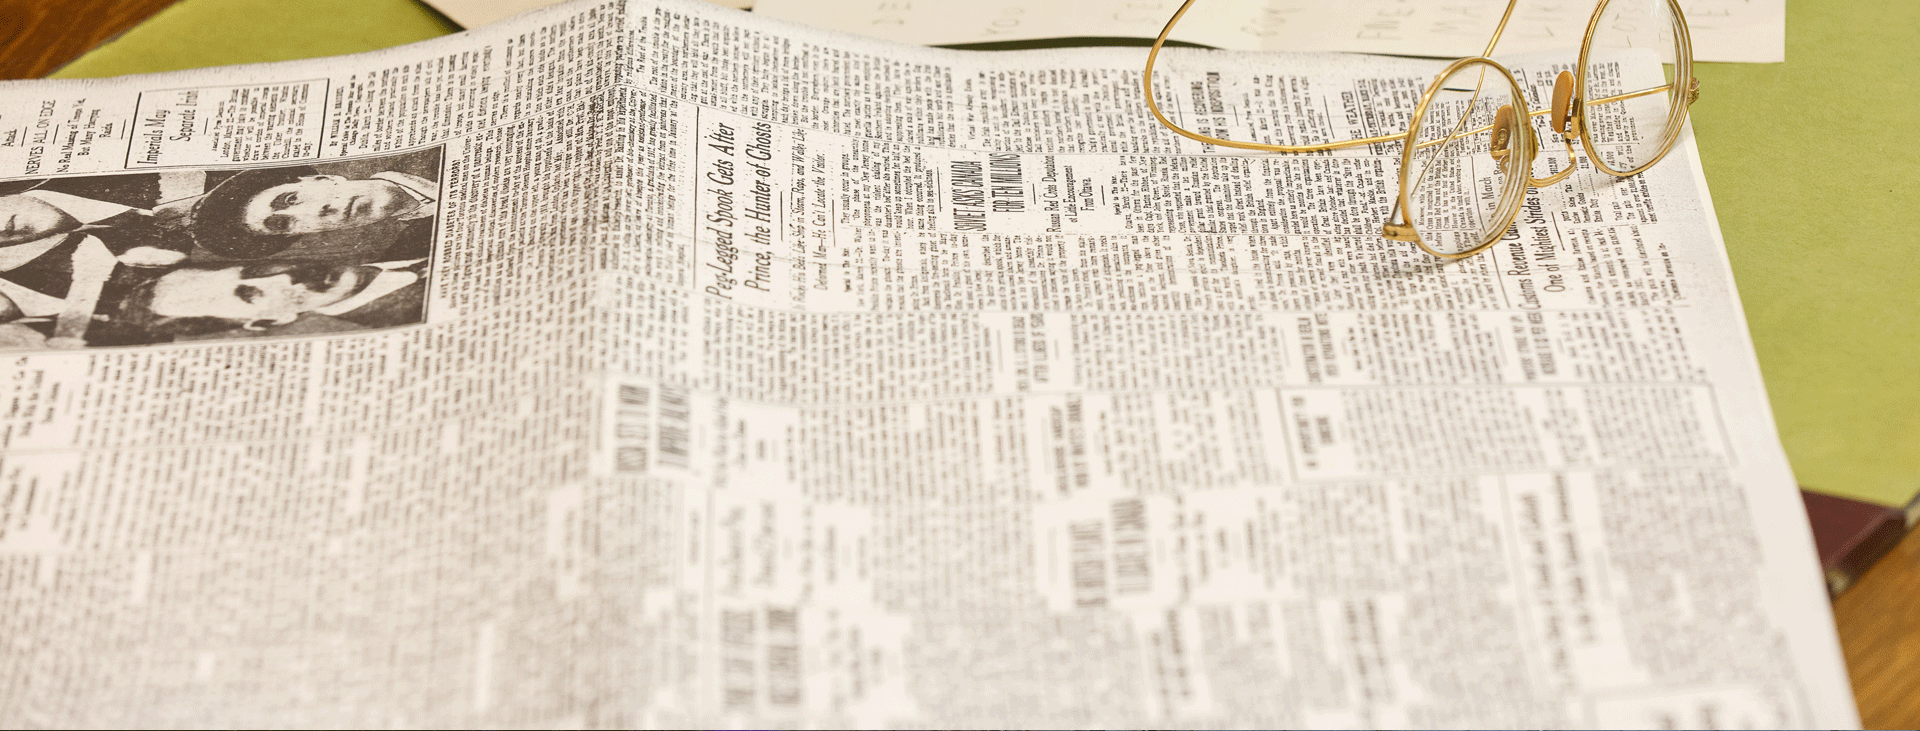 A pair of glasses sitting on an old newspaper